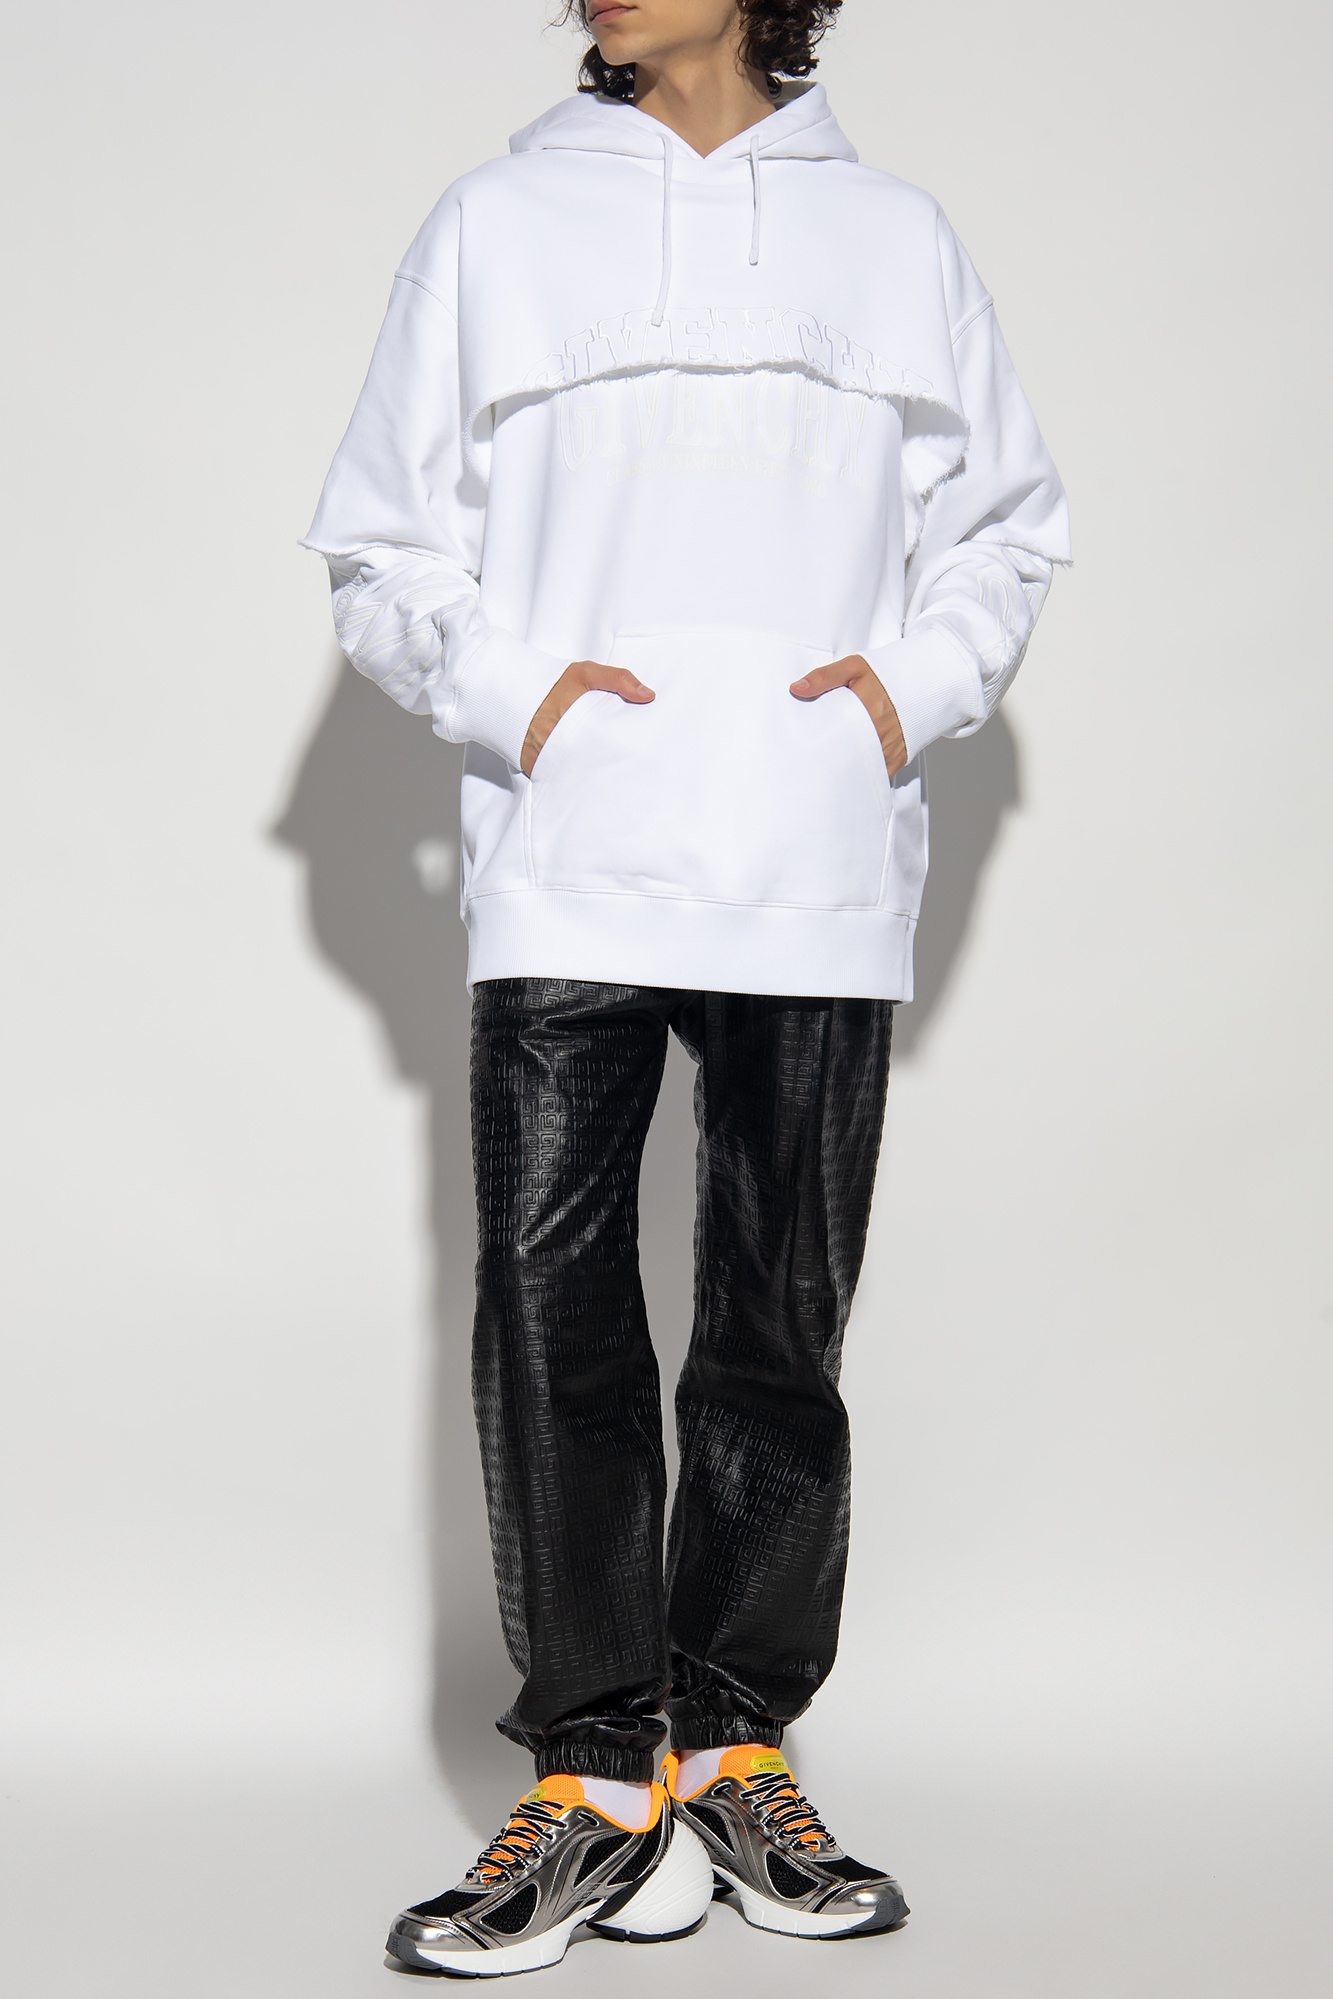 Givenchy Leather shirt-dress trousers with monogram